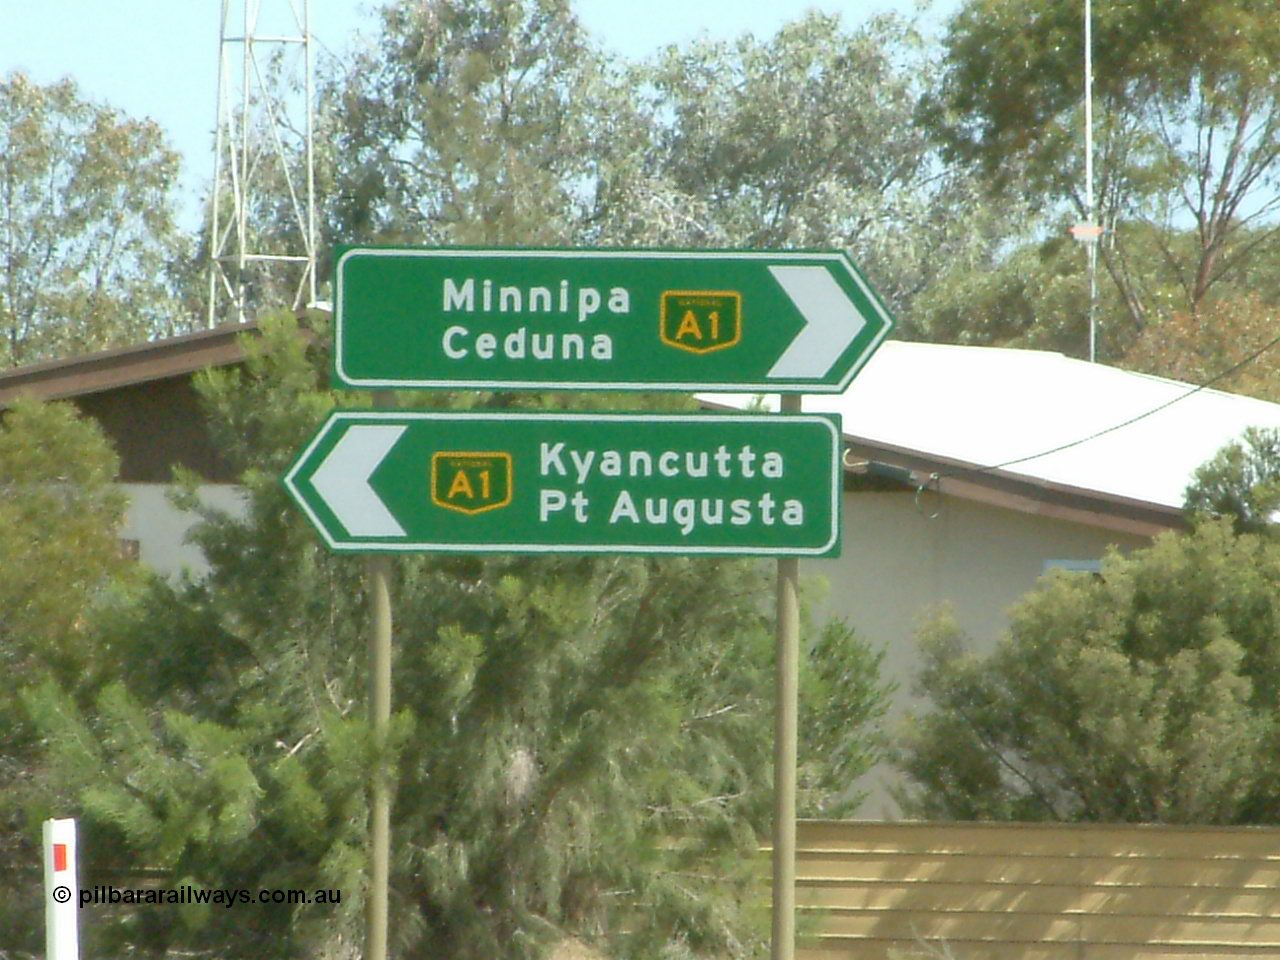 030405 133624
Kyancutta, road signs at the junction of the Eyre and Tod Highways, 5th April 2003.
